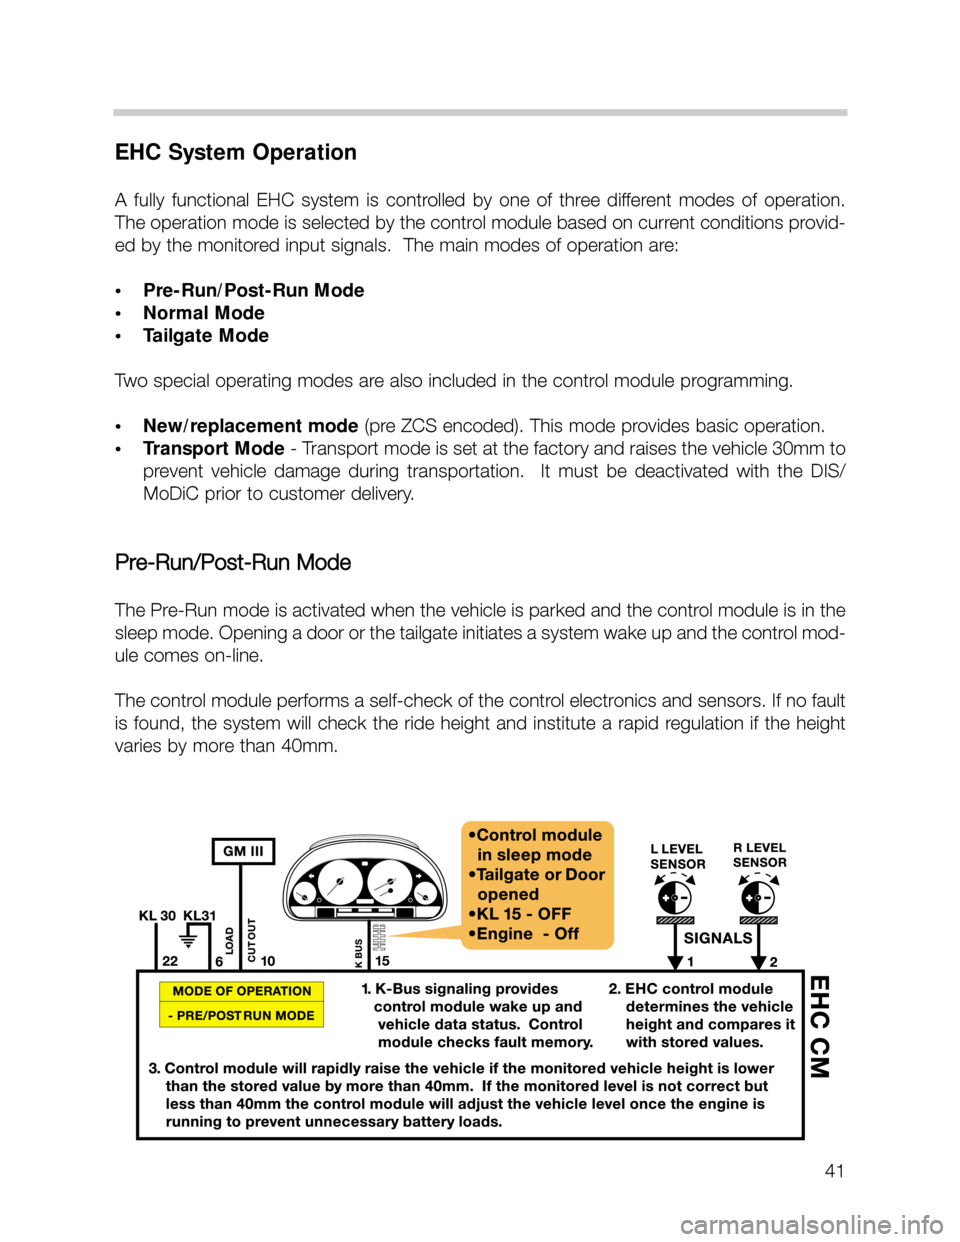 BMW X5 2001 E53 Service Manual 41
EHC System Operation
A  fully  functional  EHC  system  is  controlled  by  one  of  three  different  modes  of  operation.
The operation mode is selected by the control module based on current co